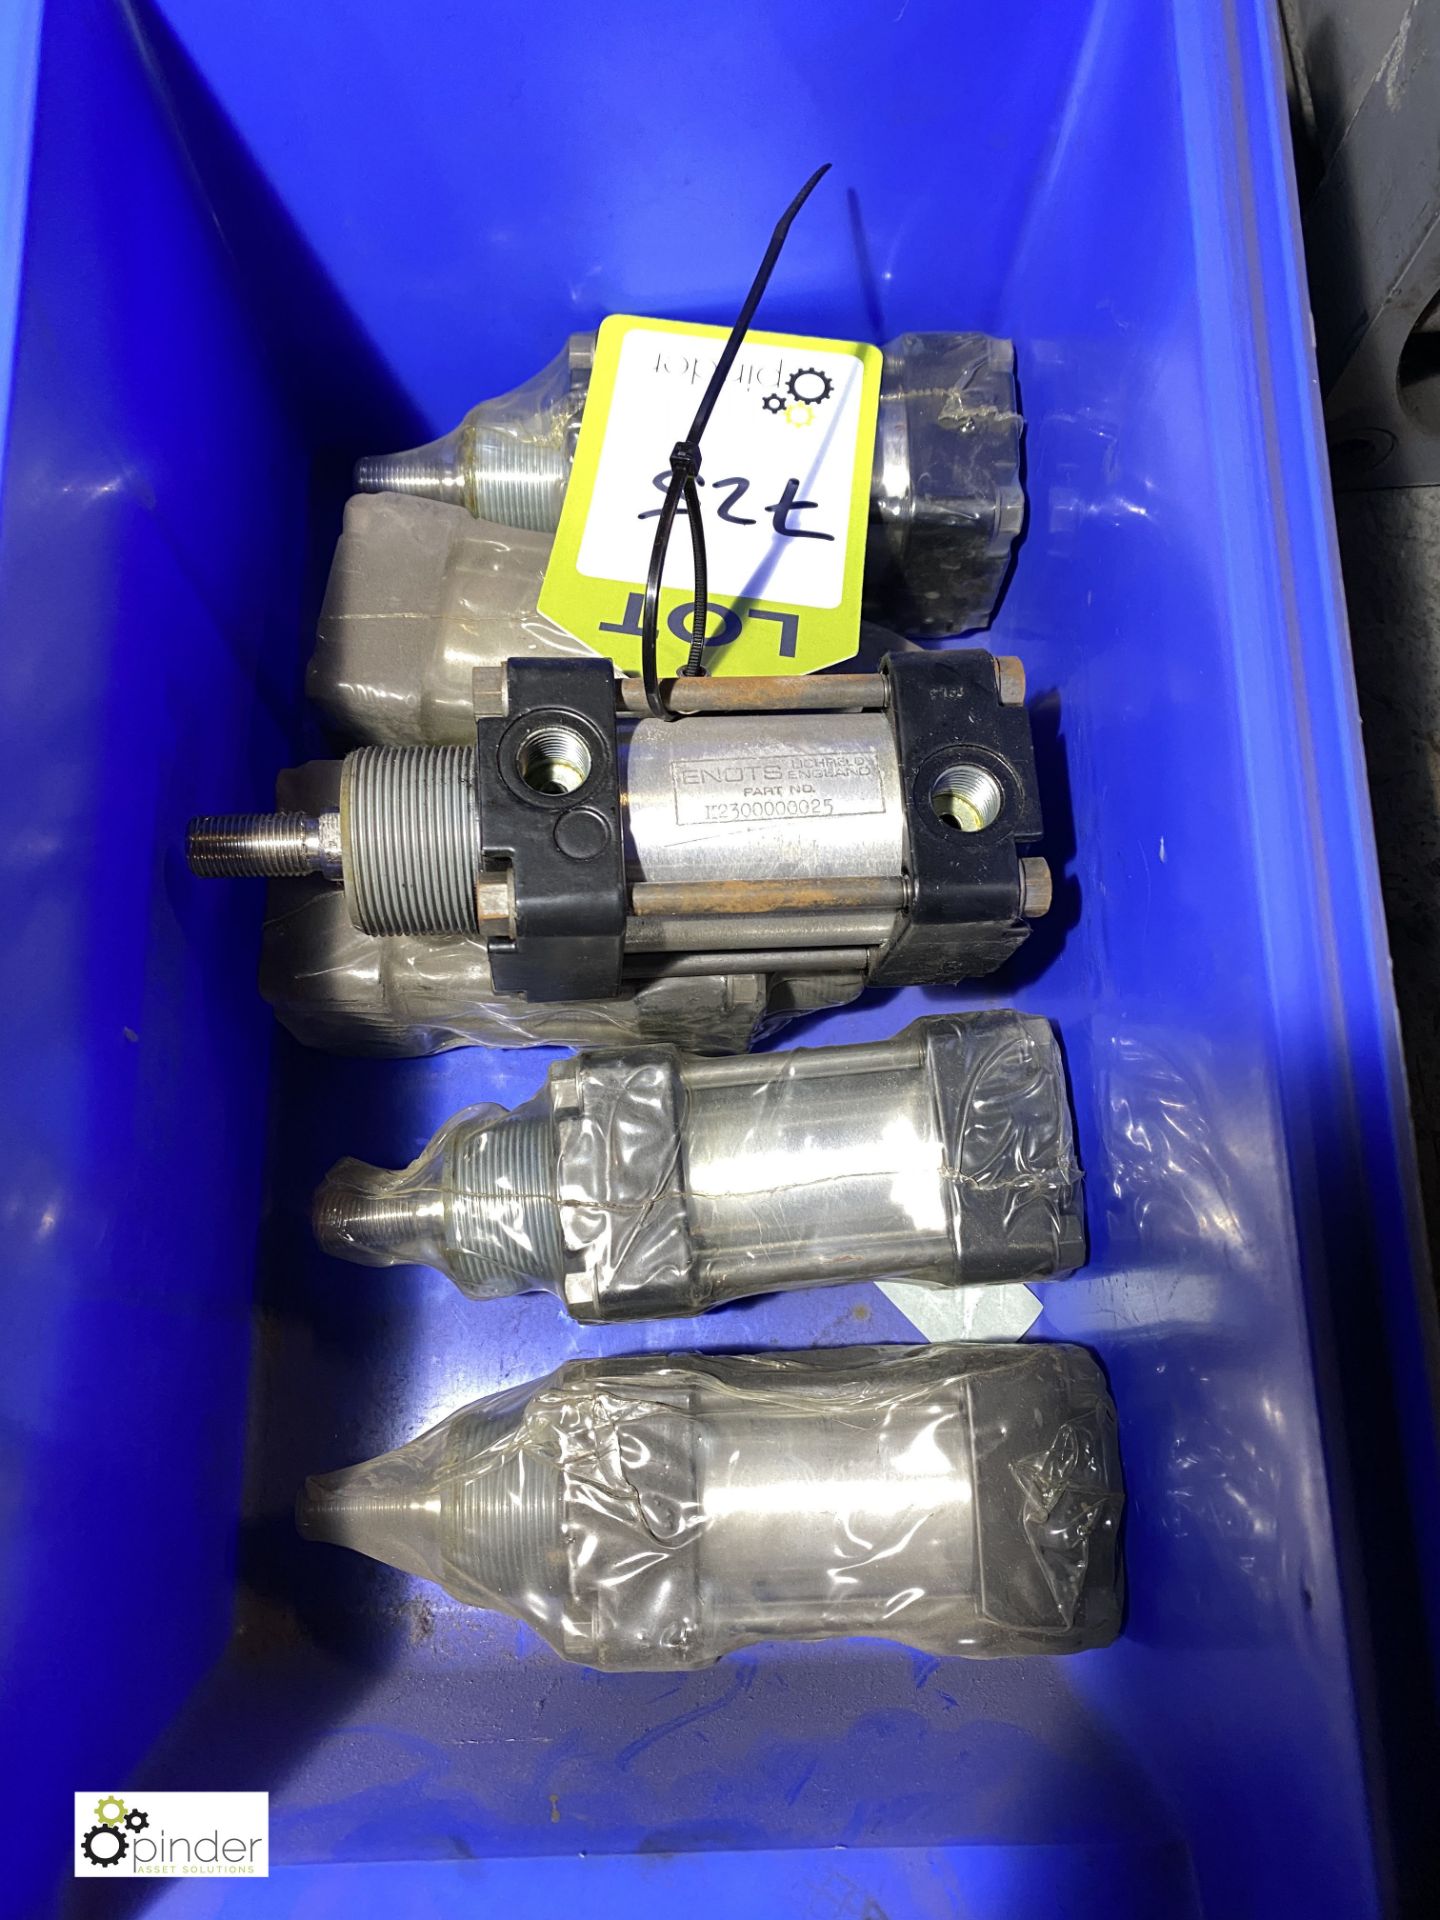 6 ENOTS K2300000025 pneumatic Cylinders (please note there is a lift out fee of £5 plus VAT on